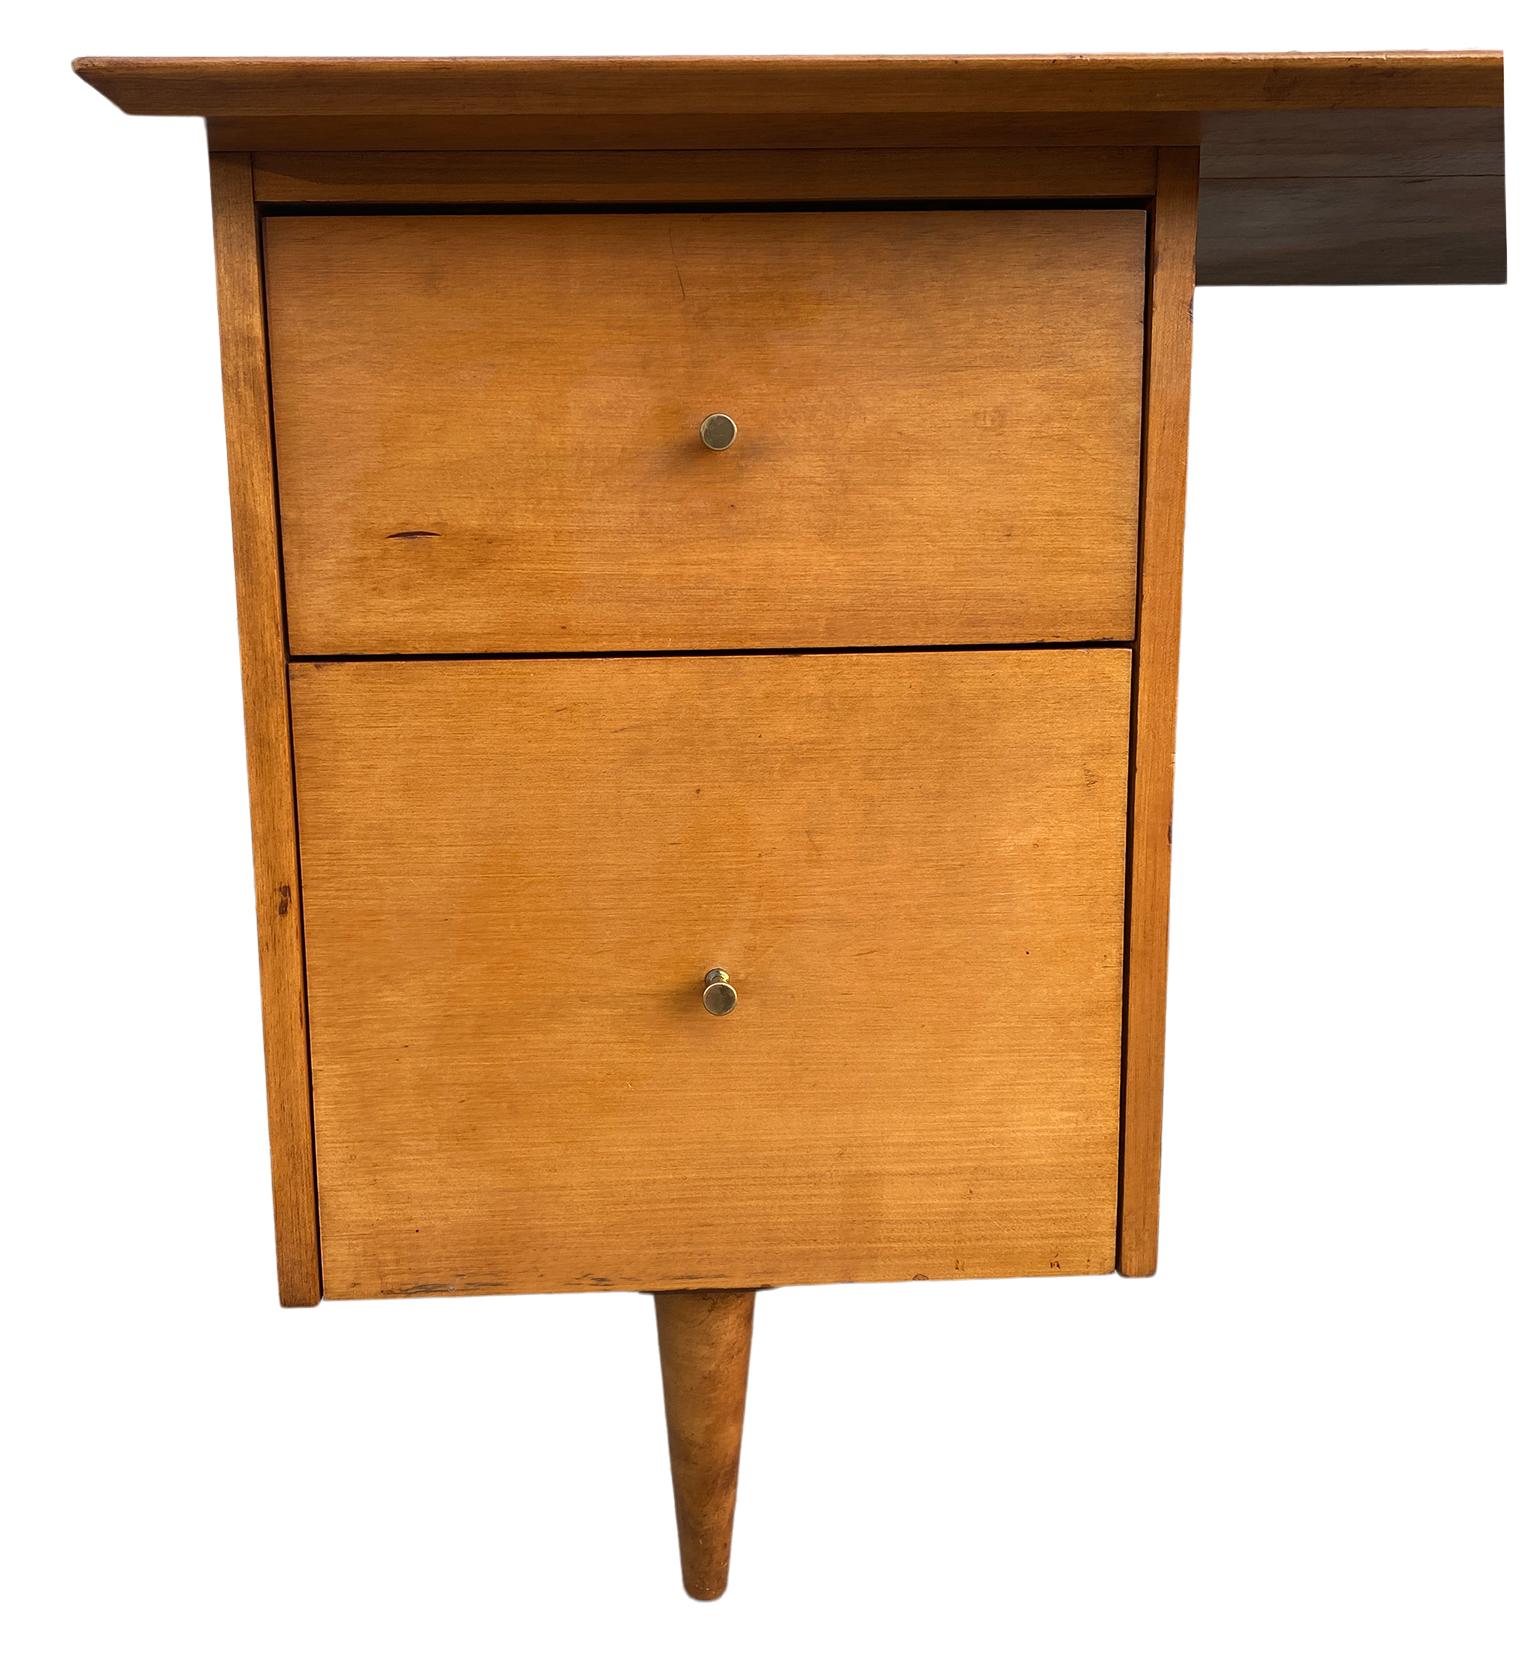 Brass Midcentury Paul McCobb #1560 Double Drawer Desk Tobacco Maple Finish with Chair